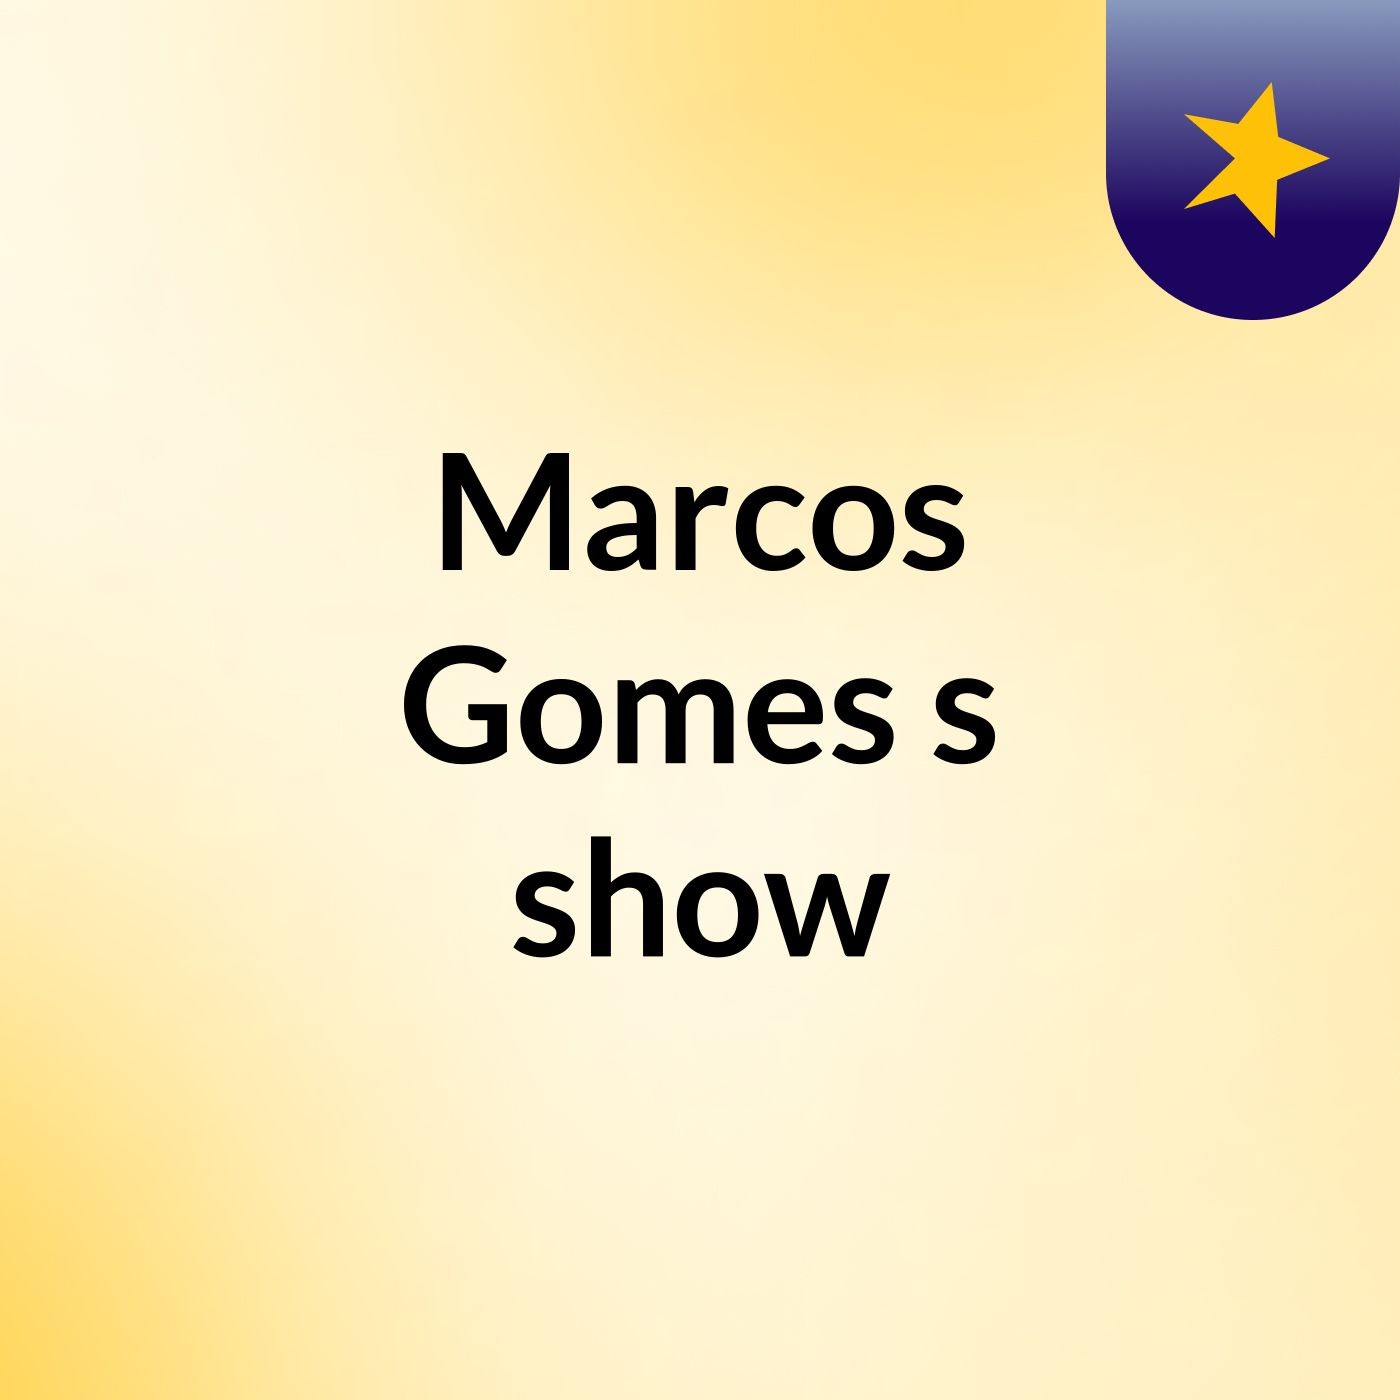 Marcos Gomes's show